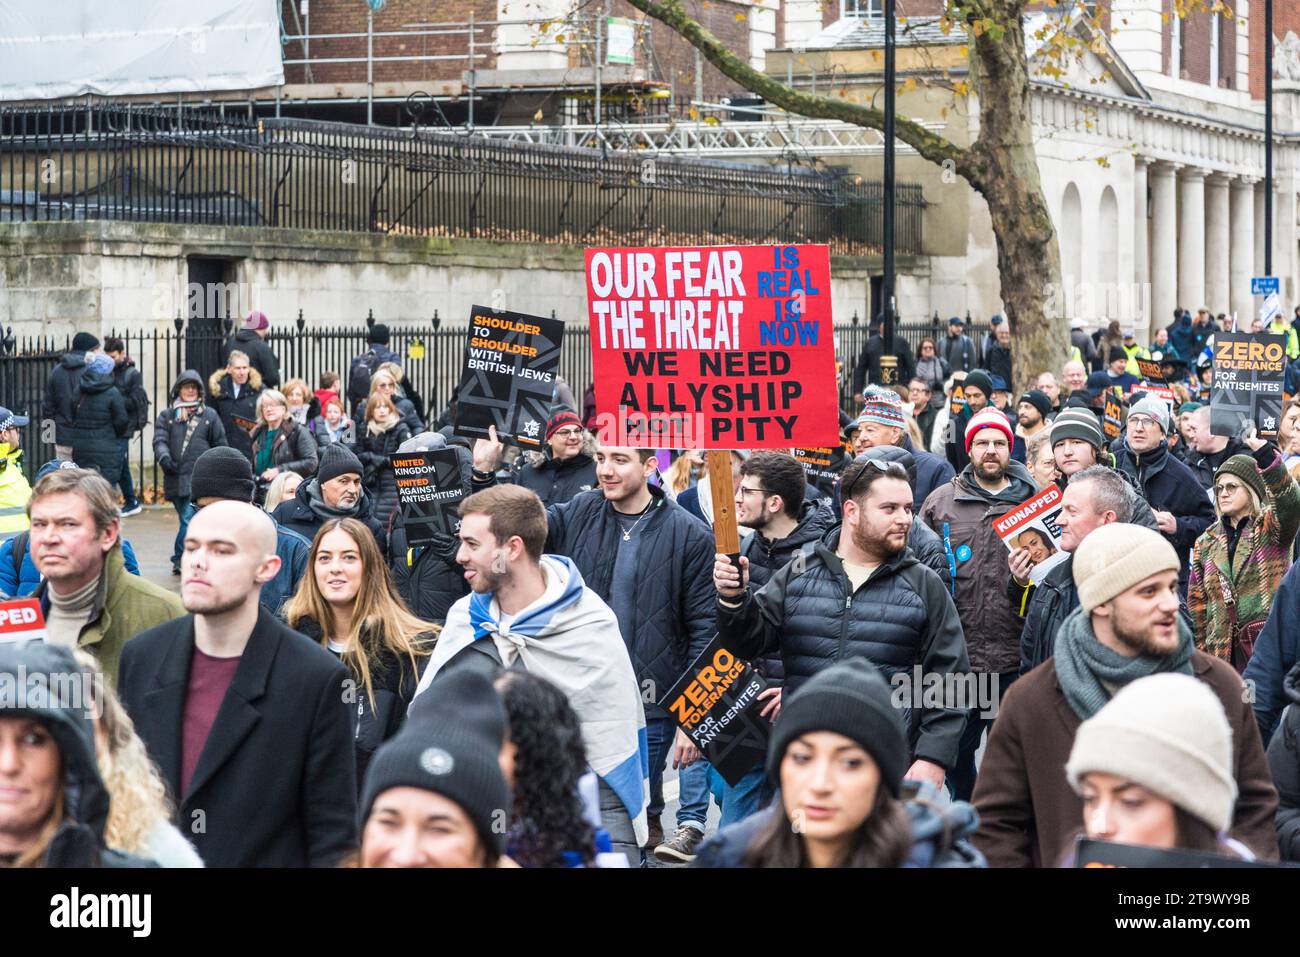 Our Fear is Real, The Threat is Now placard, March against antisemitism, tens of thousands people protest against a rise in hate crimes against Jews, Stock Photo